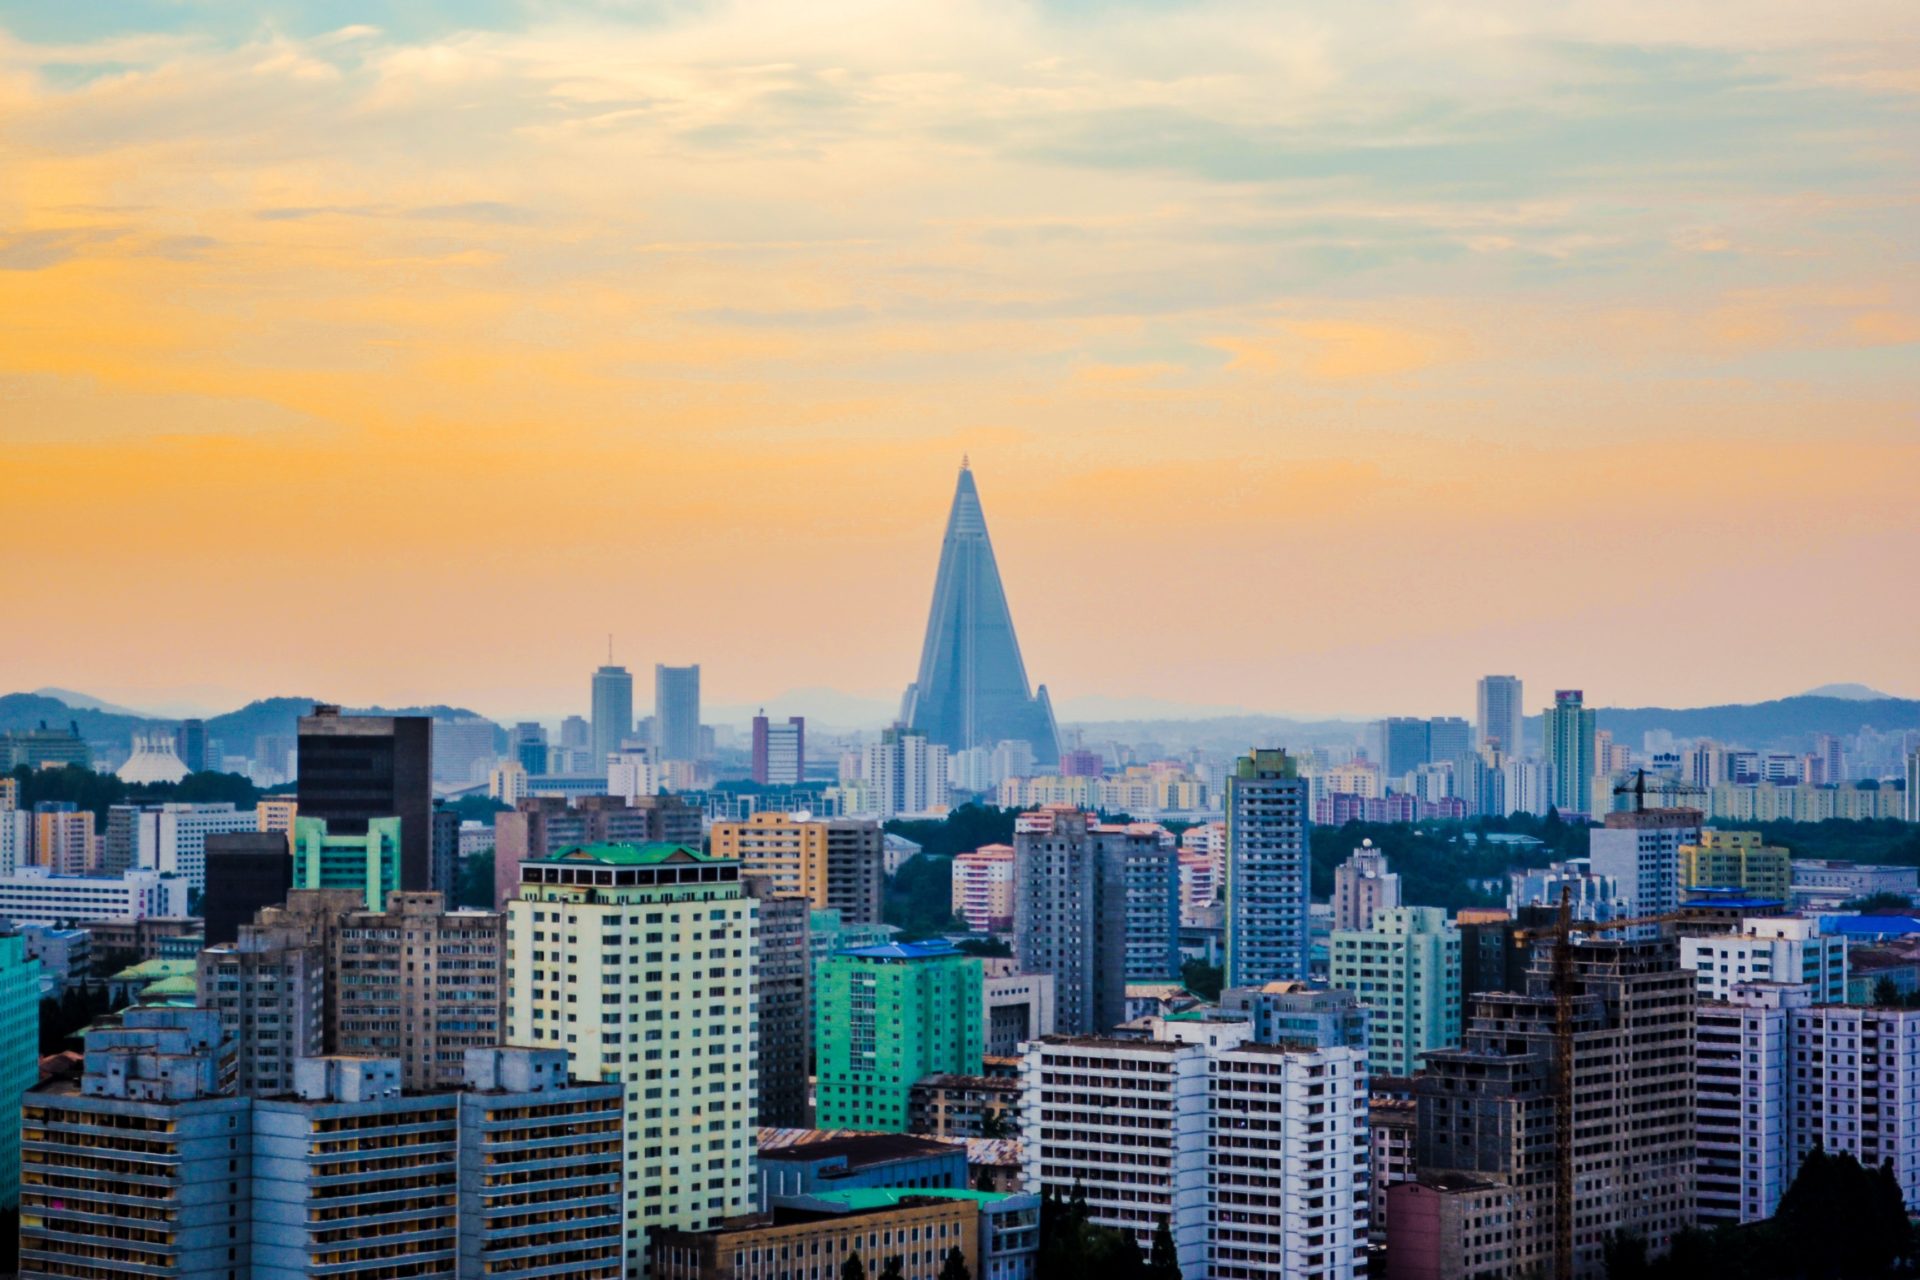 Sanctions Evasion and Cryptocurrency Mining in North Korea